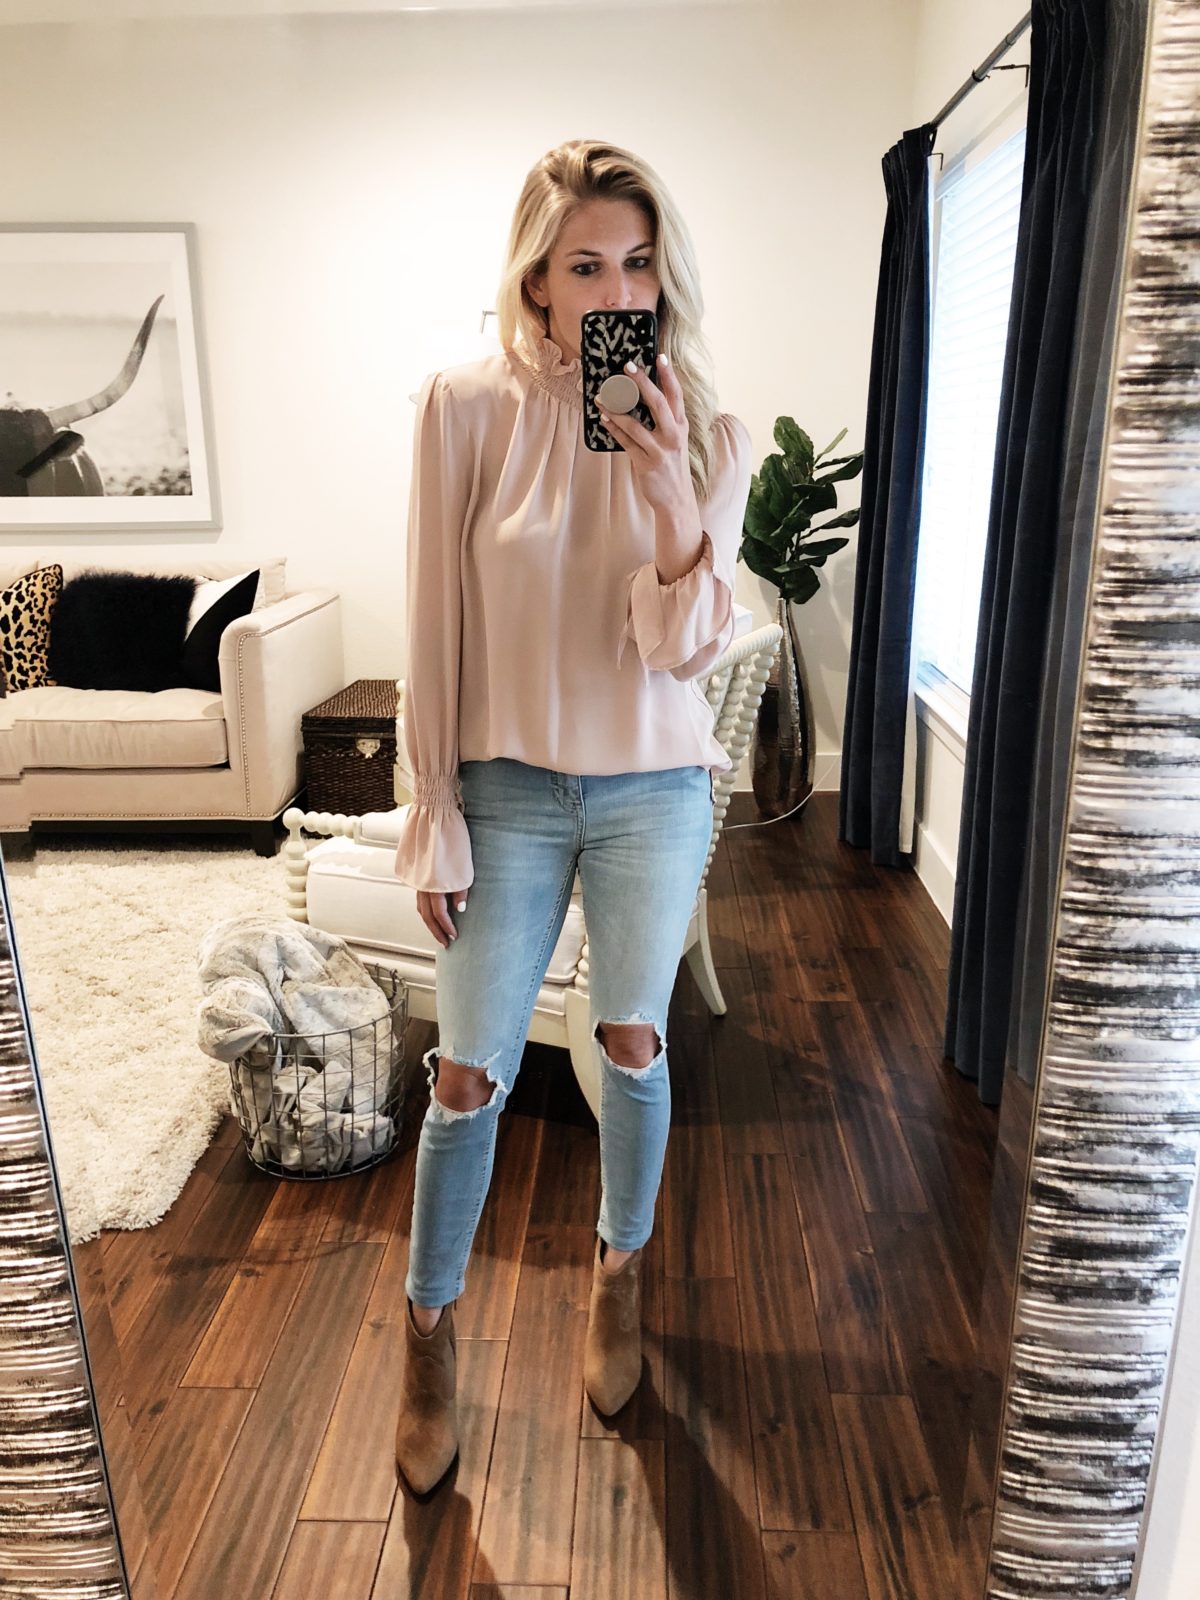 woman wearing Vince Camuto Motiva Bootie in Size 7 1/2, Vince Camuto Smocked Neck Blouse in Size S and Free People High Waist Ankle Skinny Jeans 